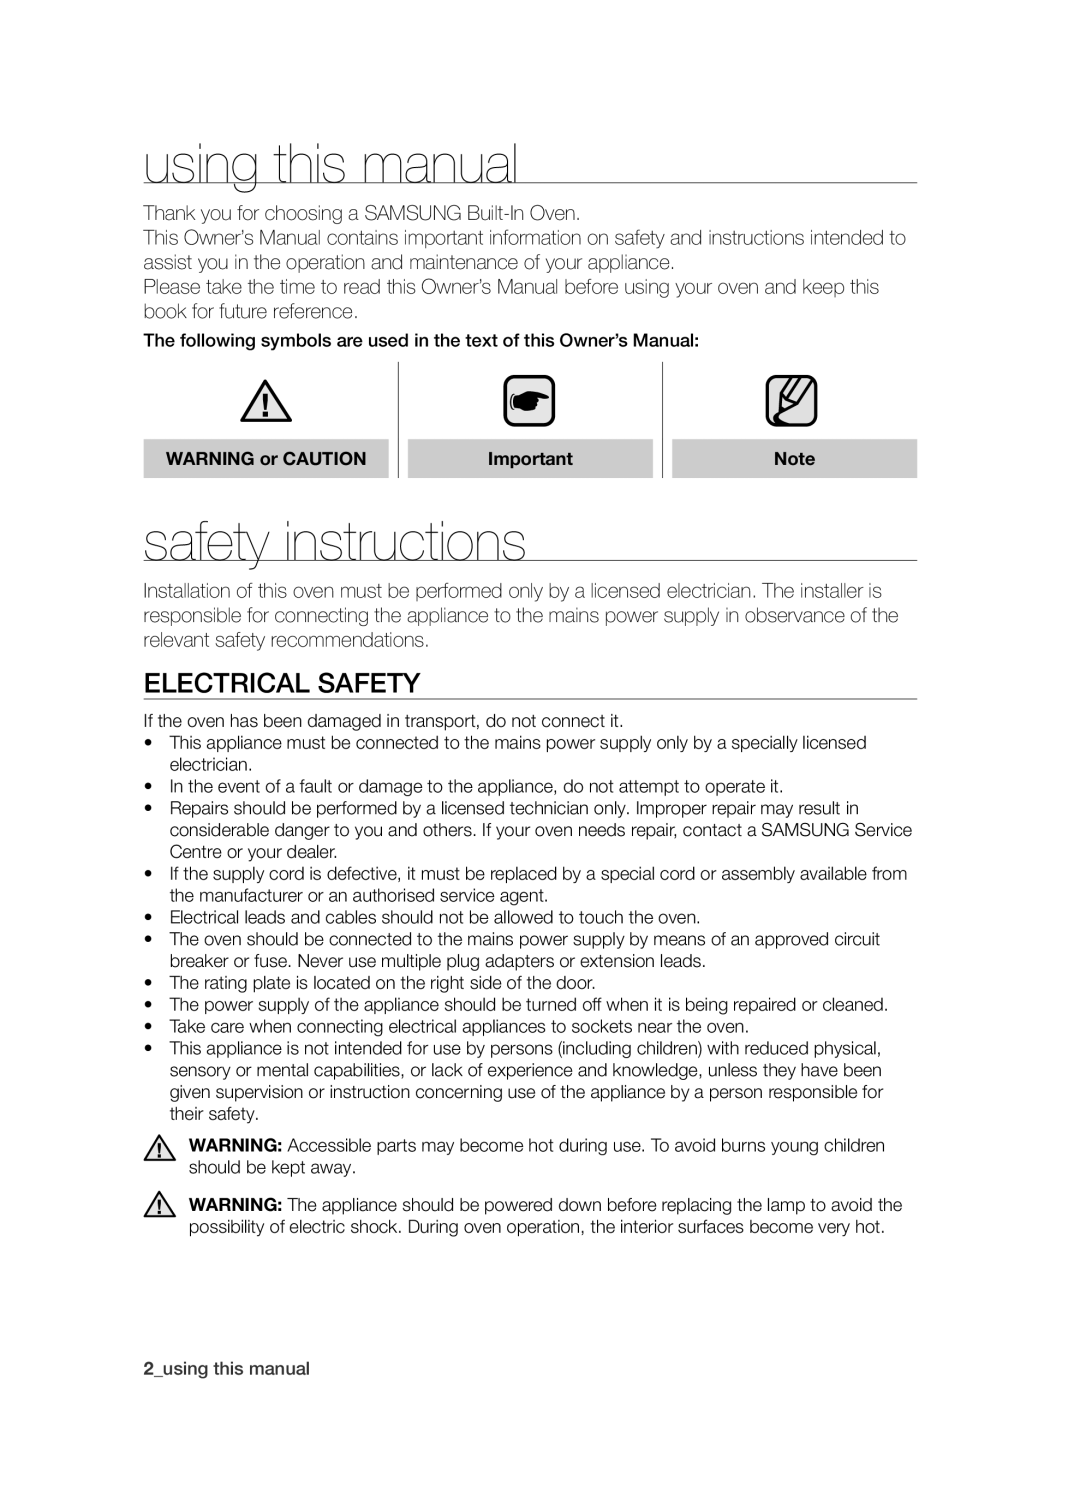 Samsung BT621 Series user manual using this manual, safety instructions, Electrical Safety 